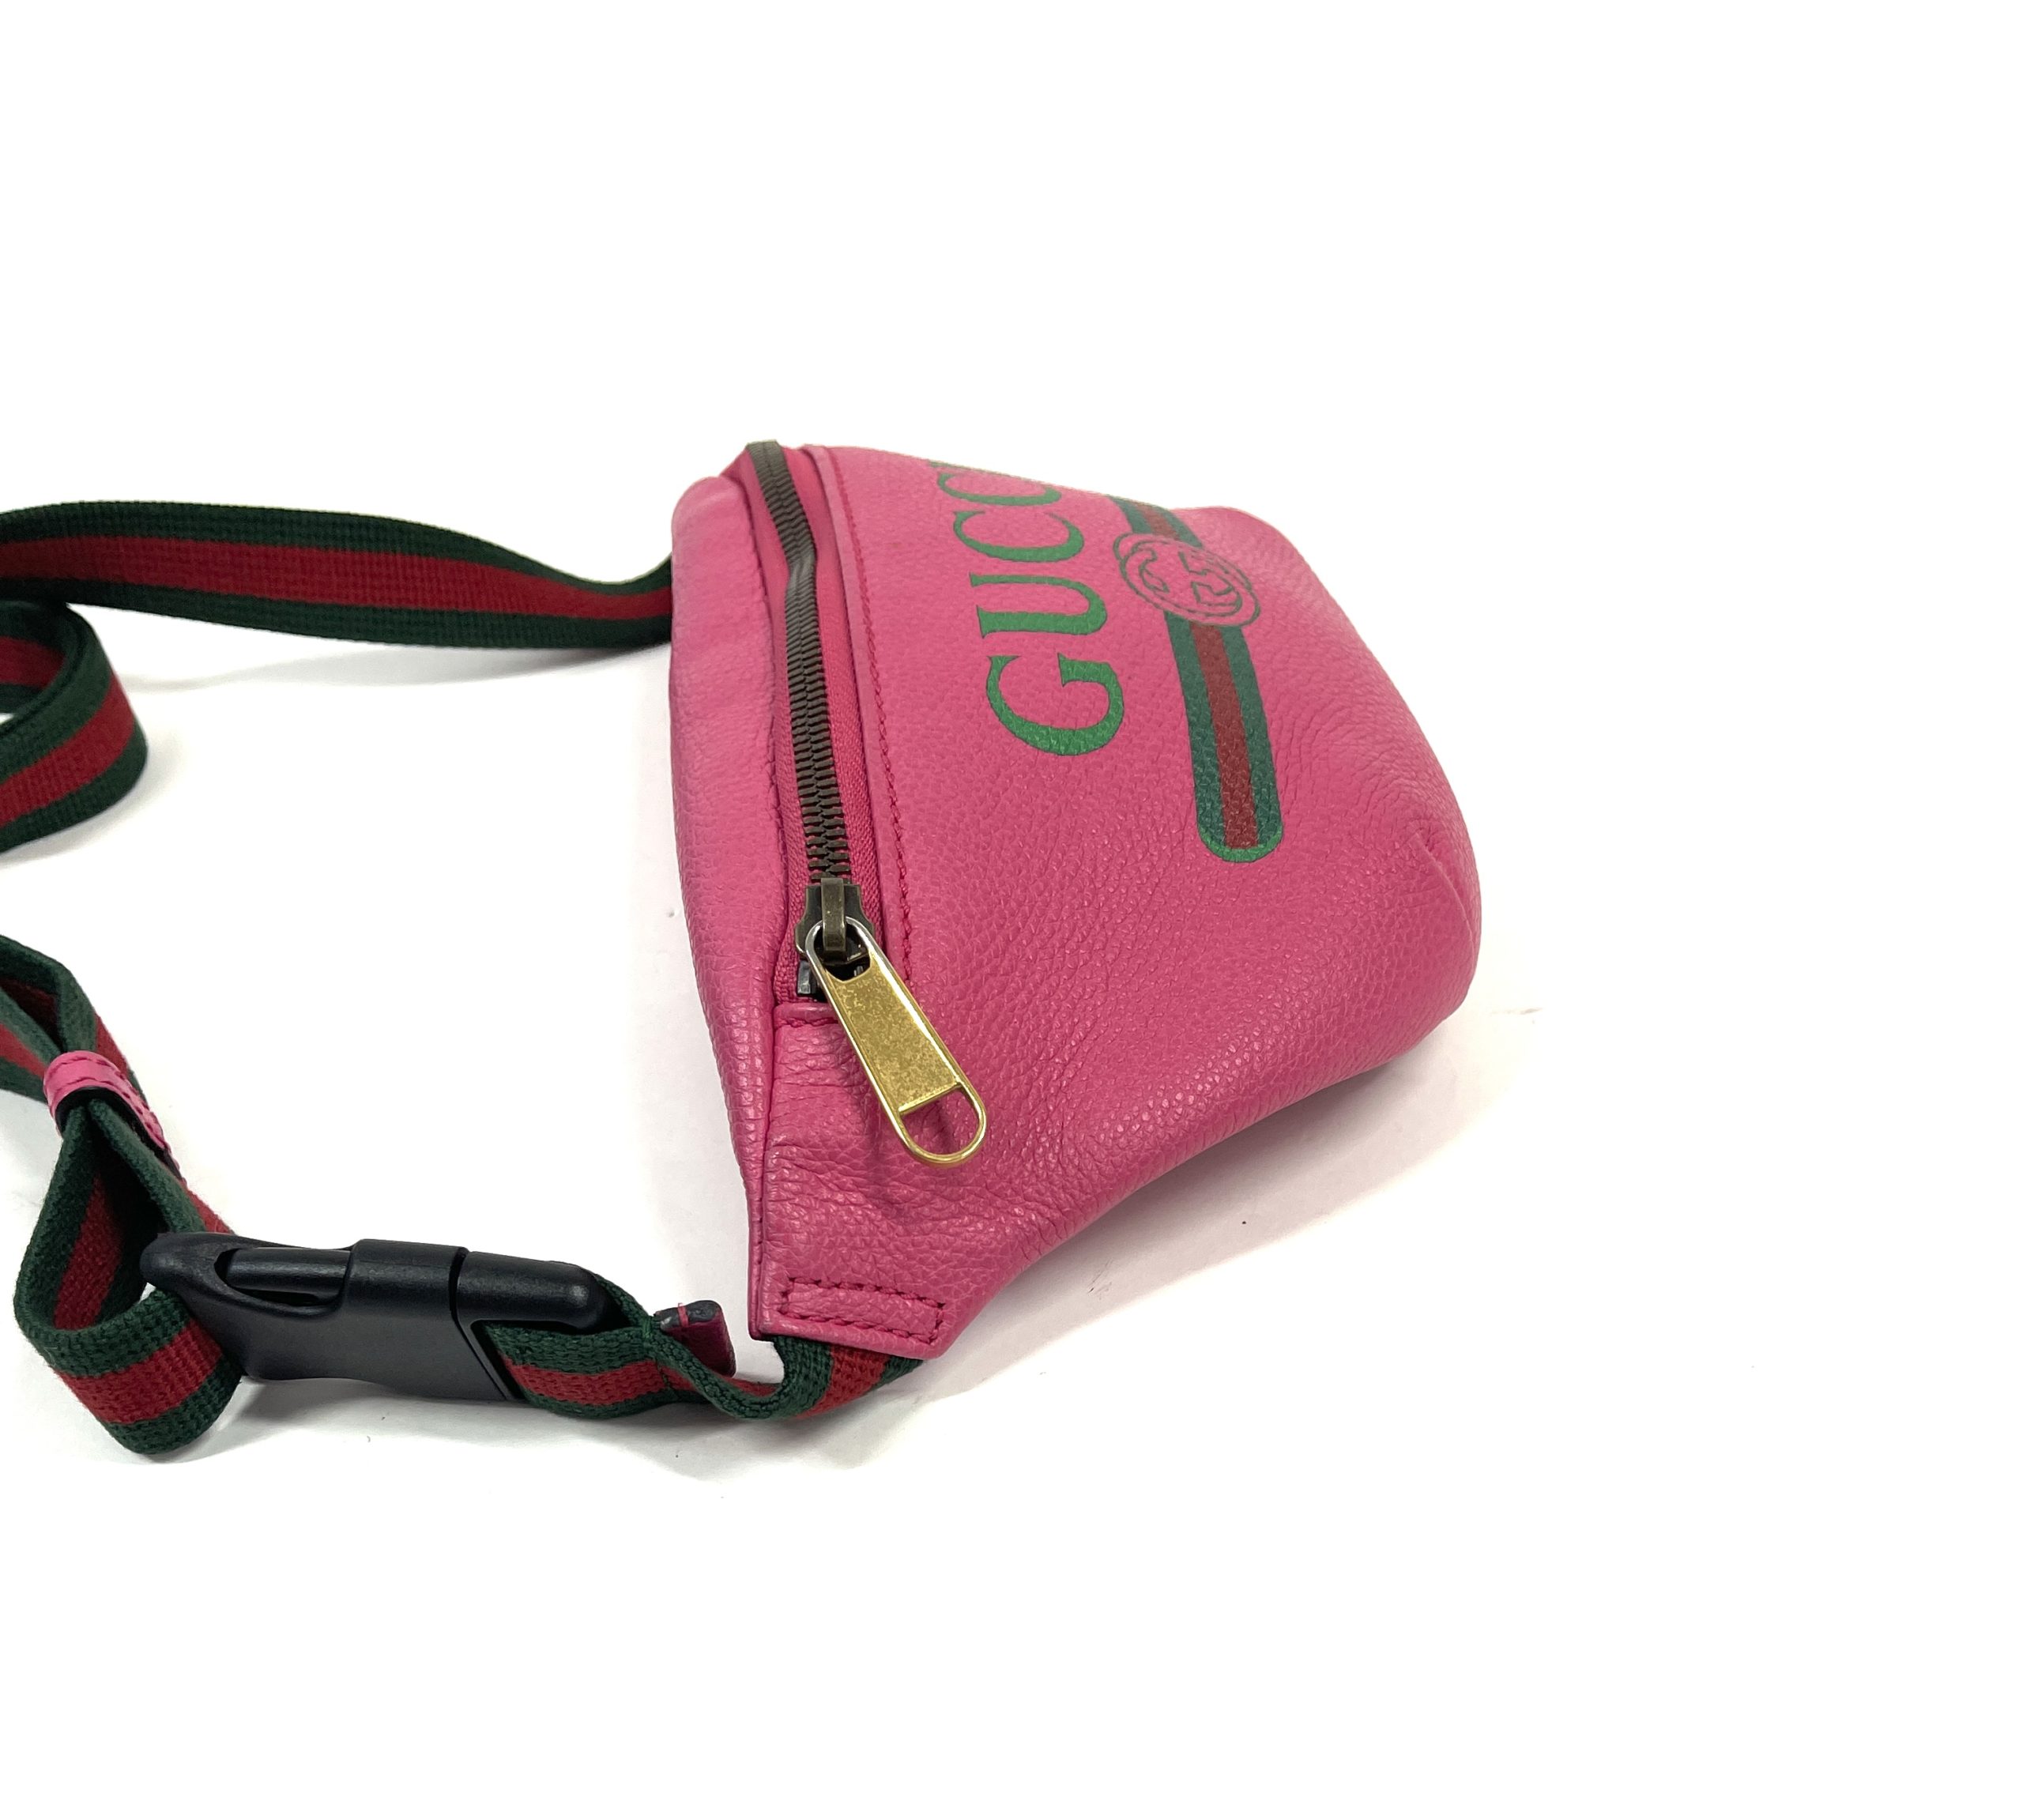 Gucci Pink Waist Bags & Fanny Packs